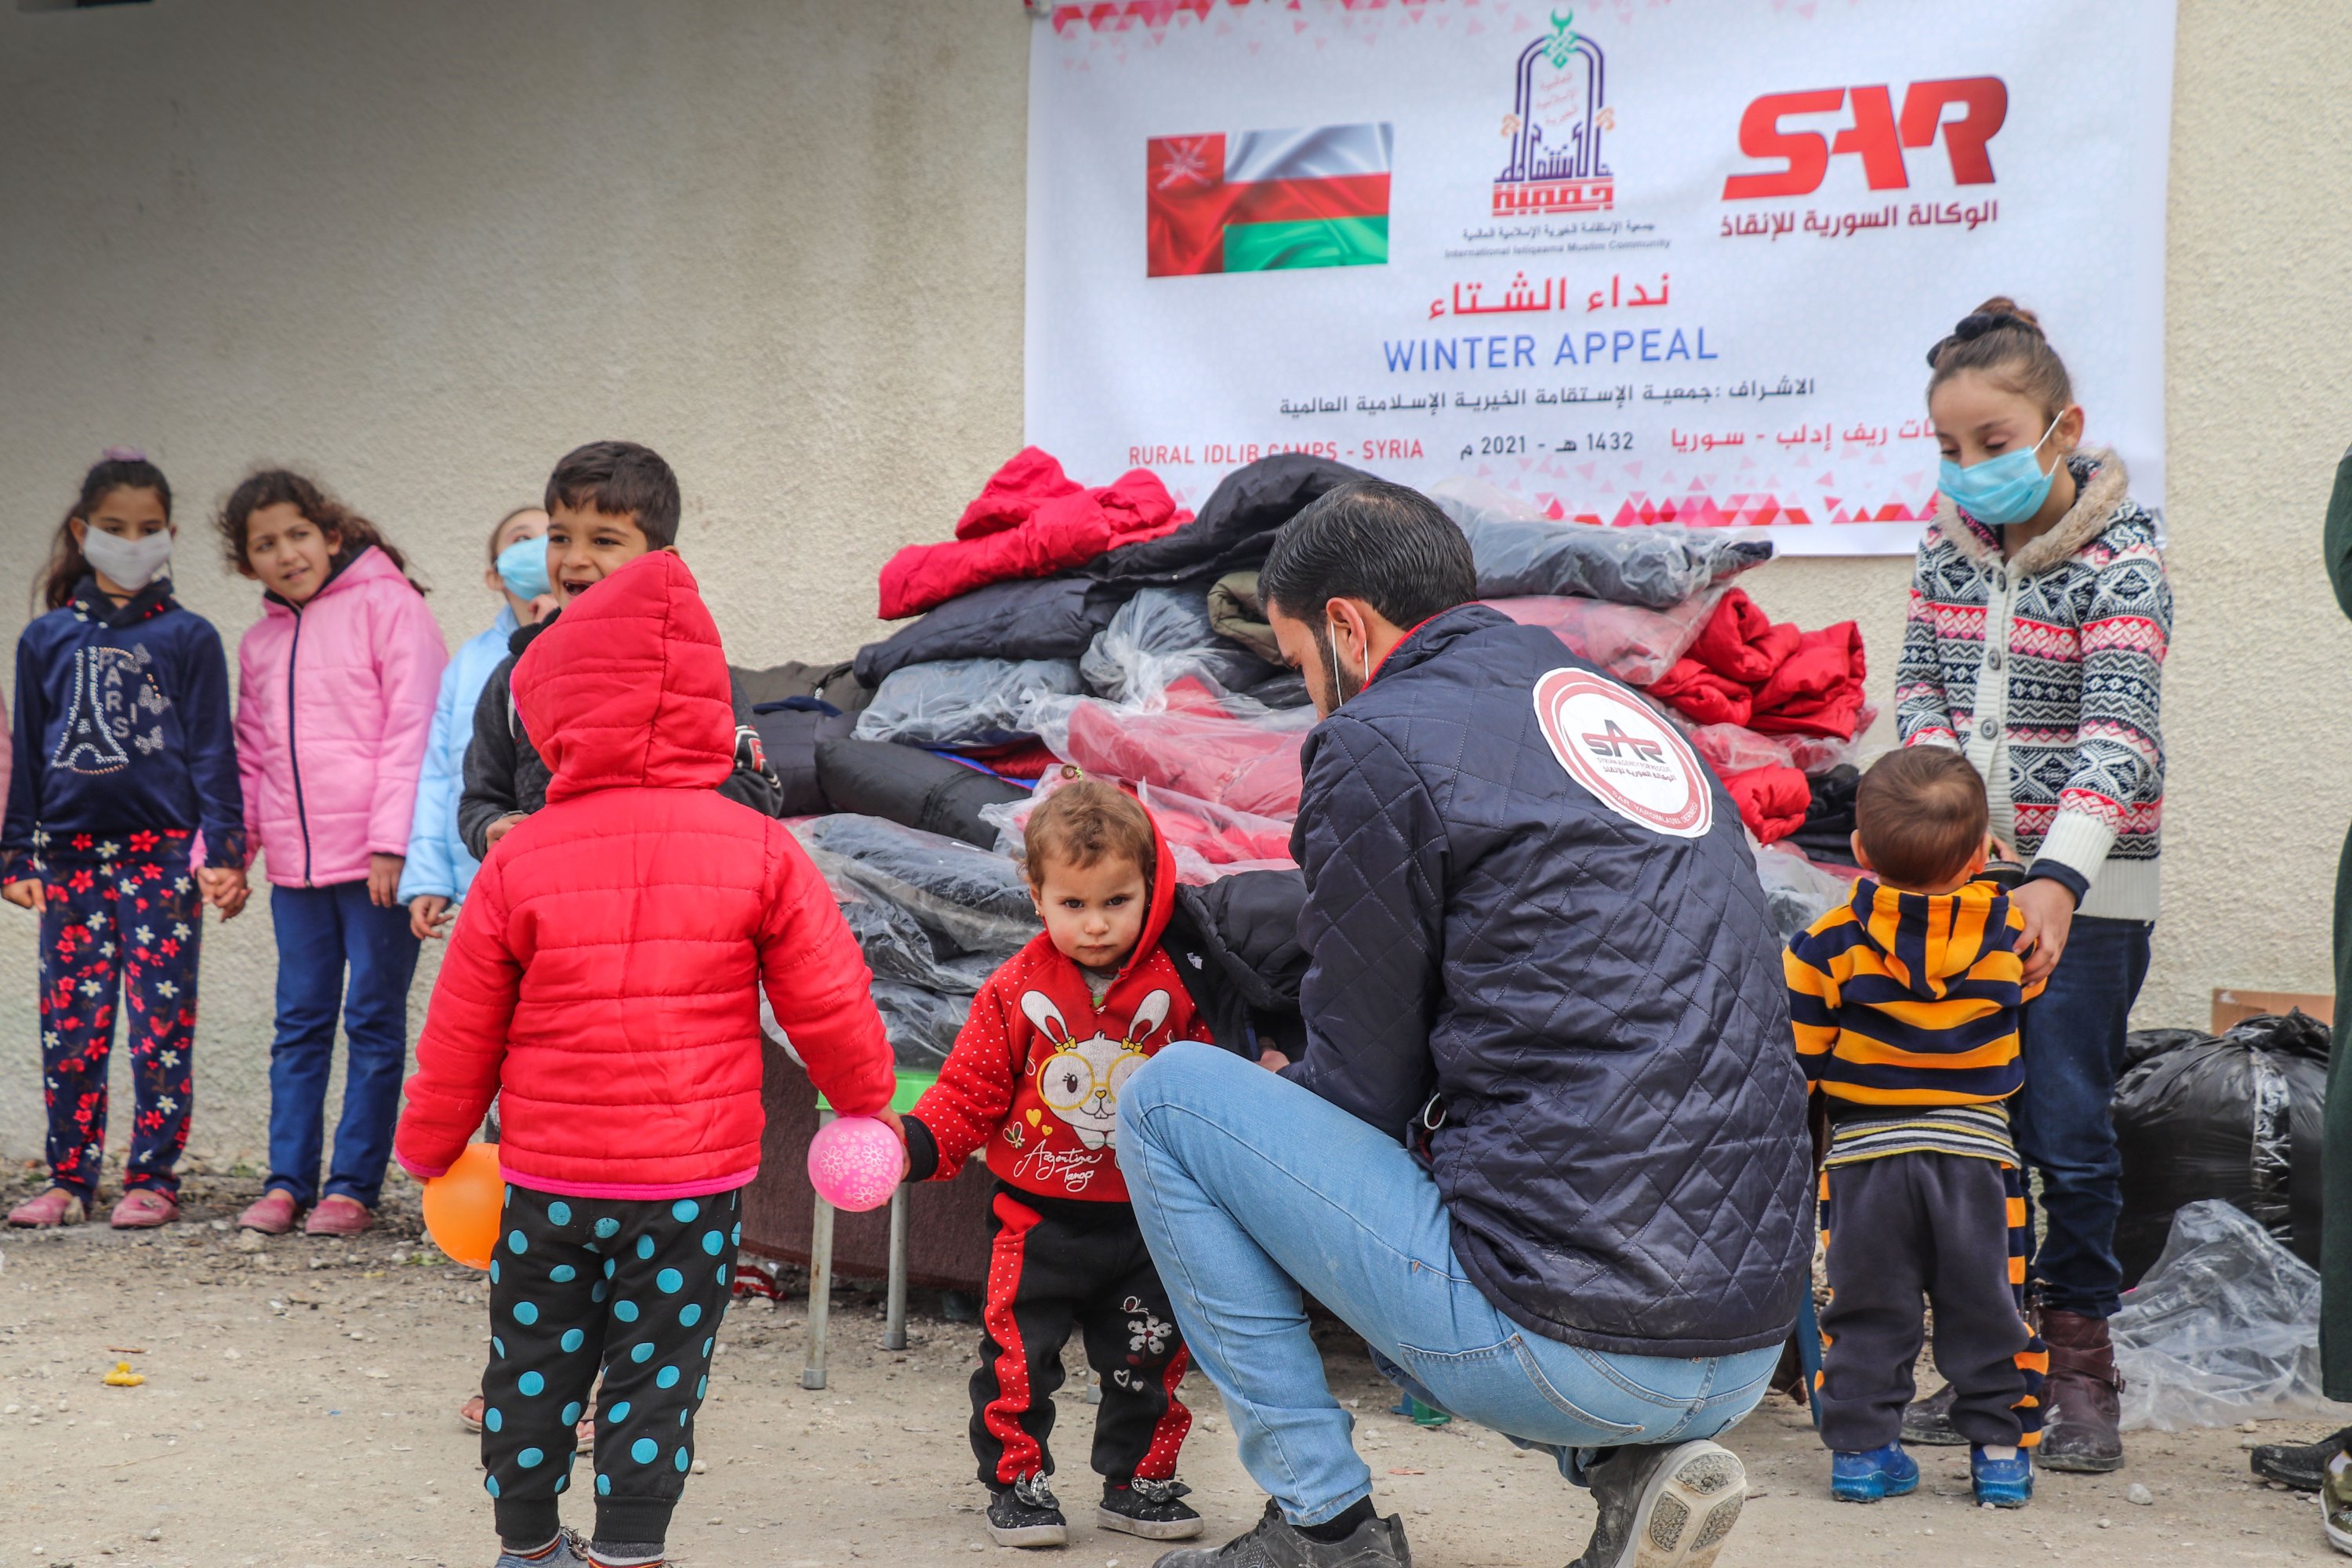 A Sar aid association personnel helps Syrian children to wear their new coats, Feb.1, 2021. (AA)

